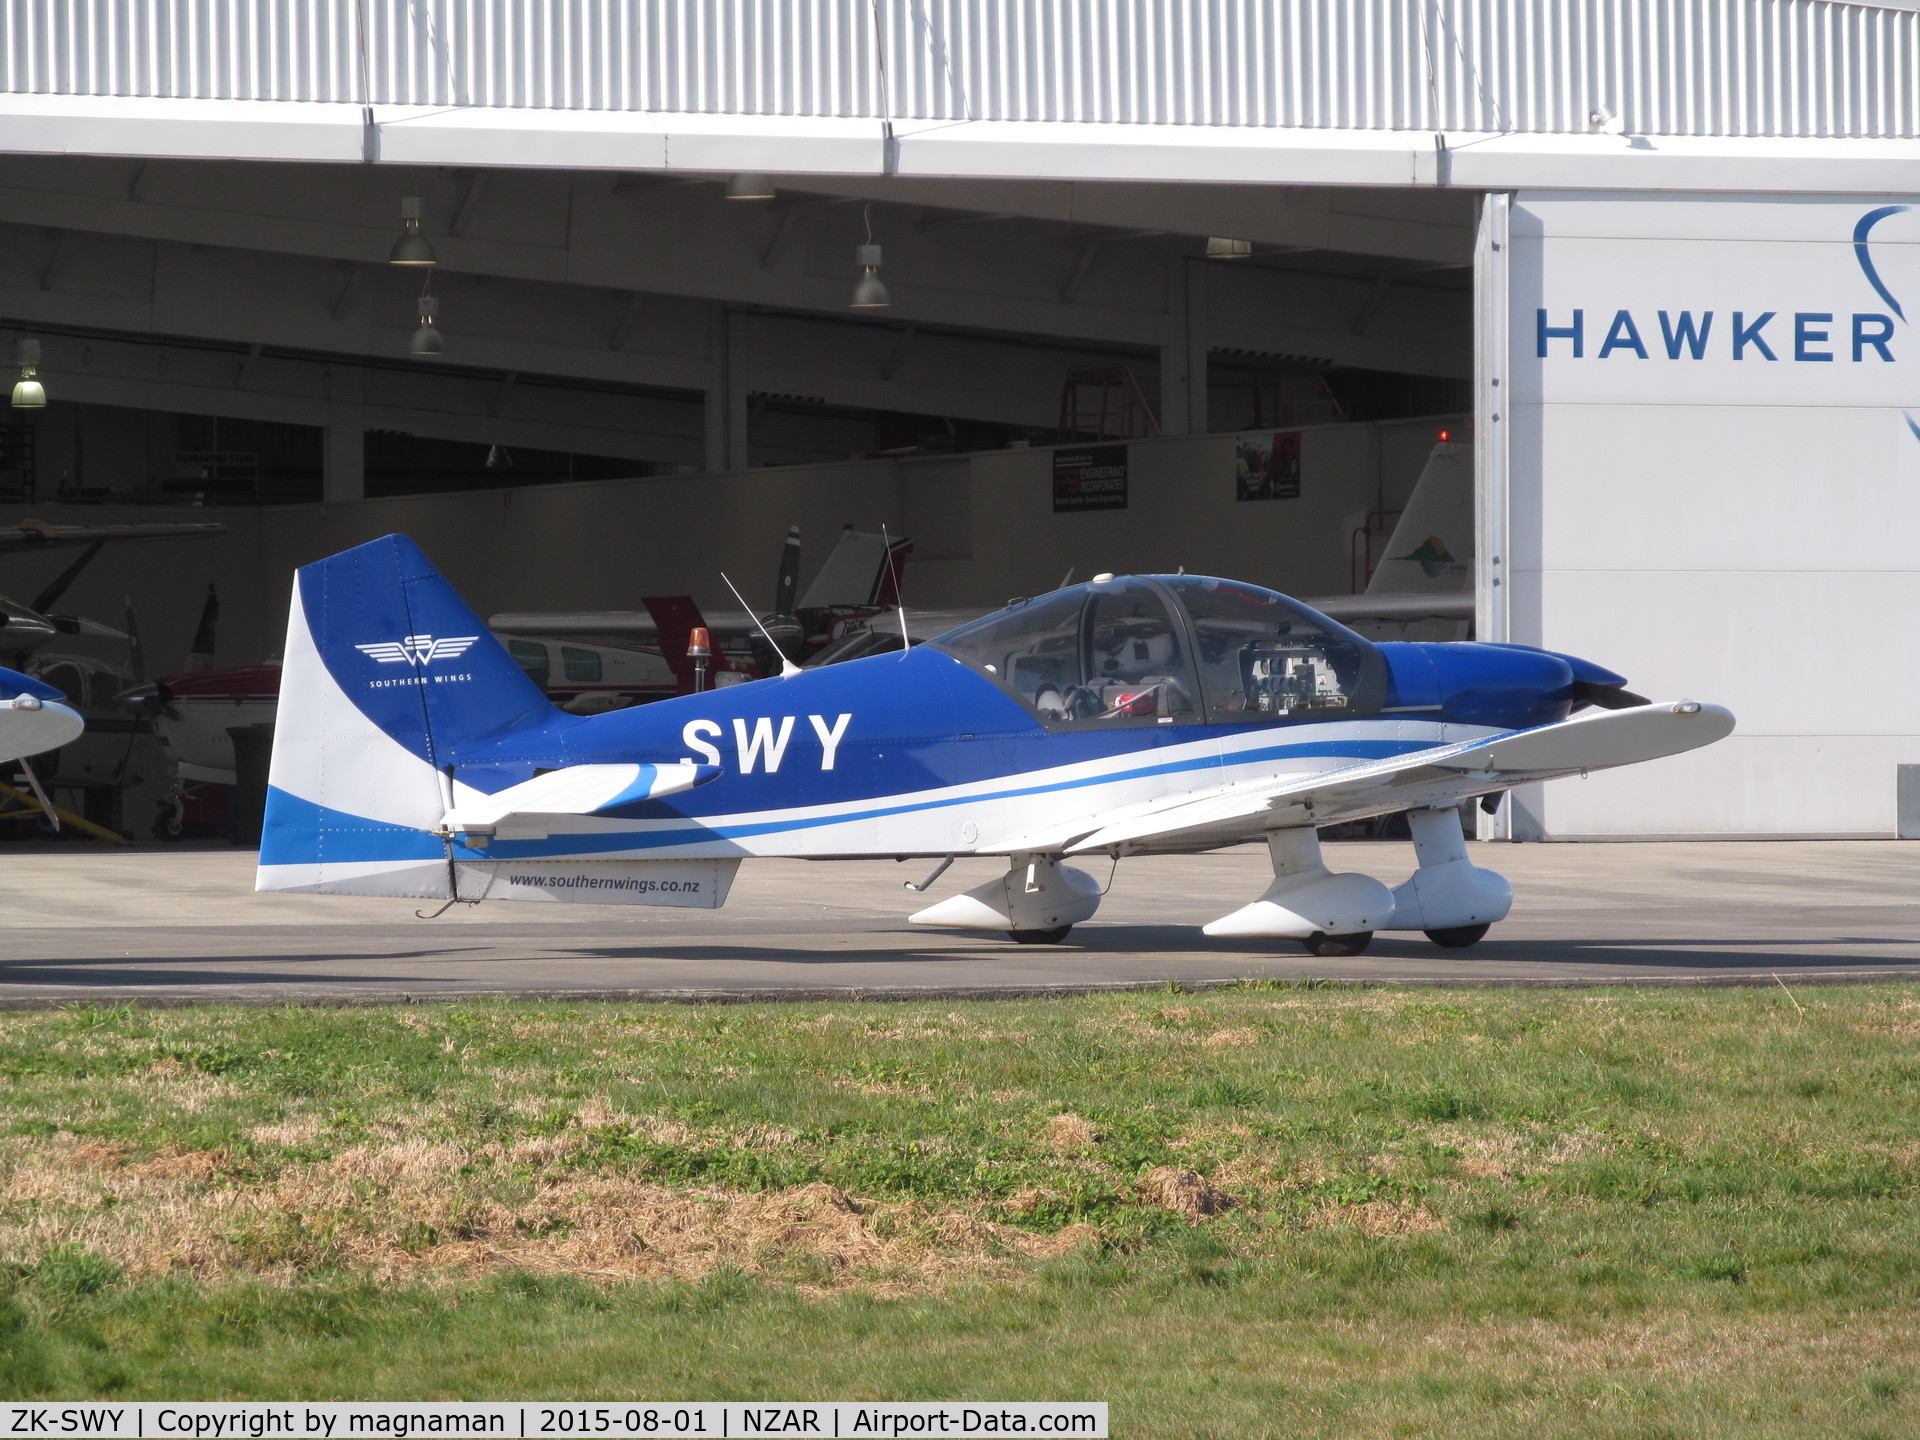 ZK-SWY, Alpha R2160 C/N 160A-06004, one of two outside hawkers today